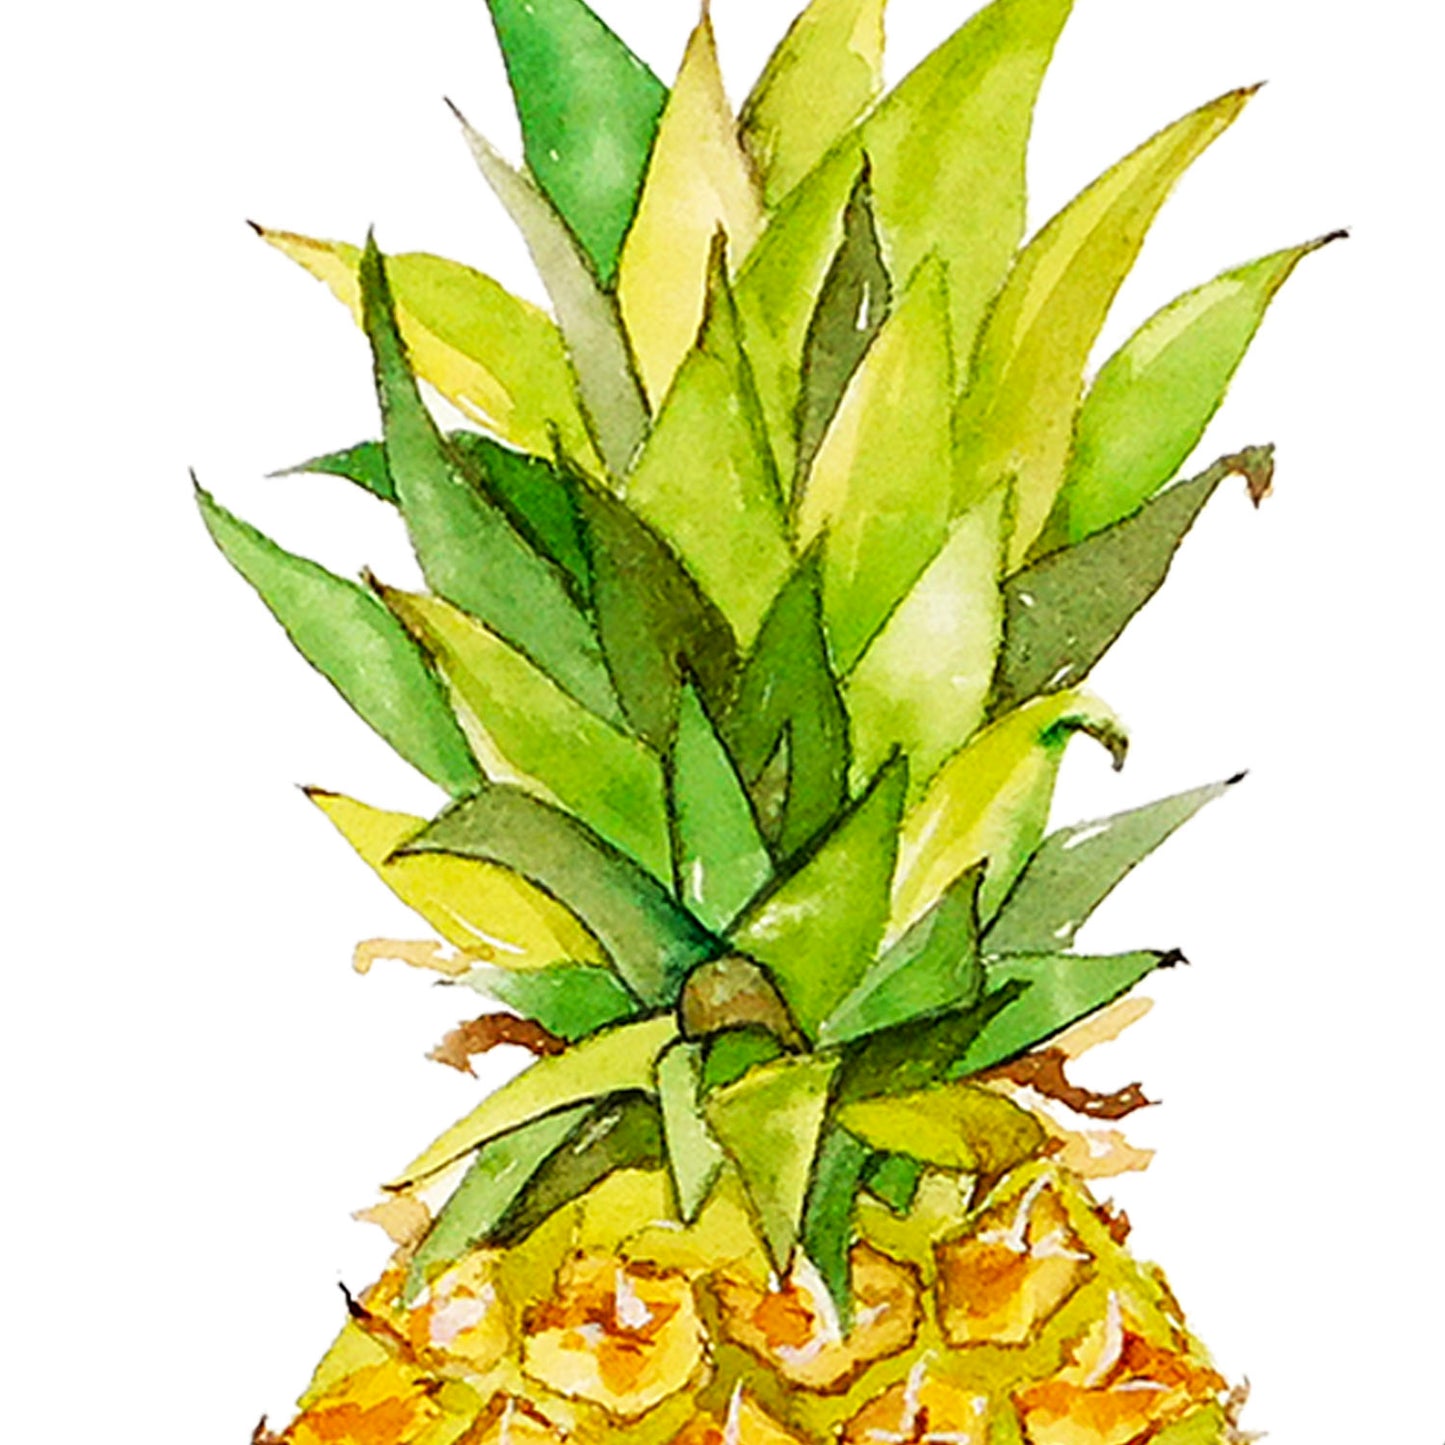 Pineapple Watercolor Painting on Wood Block - Flamingo Shores - Original Art for Home Decor and Gifts